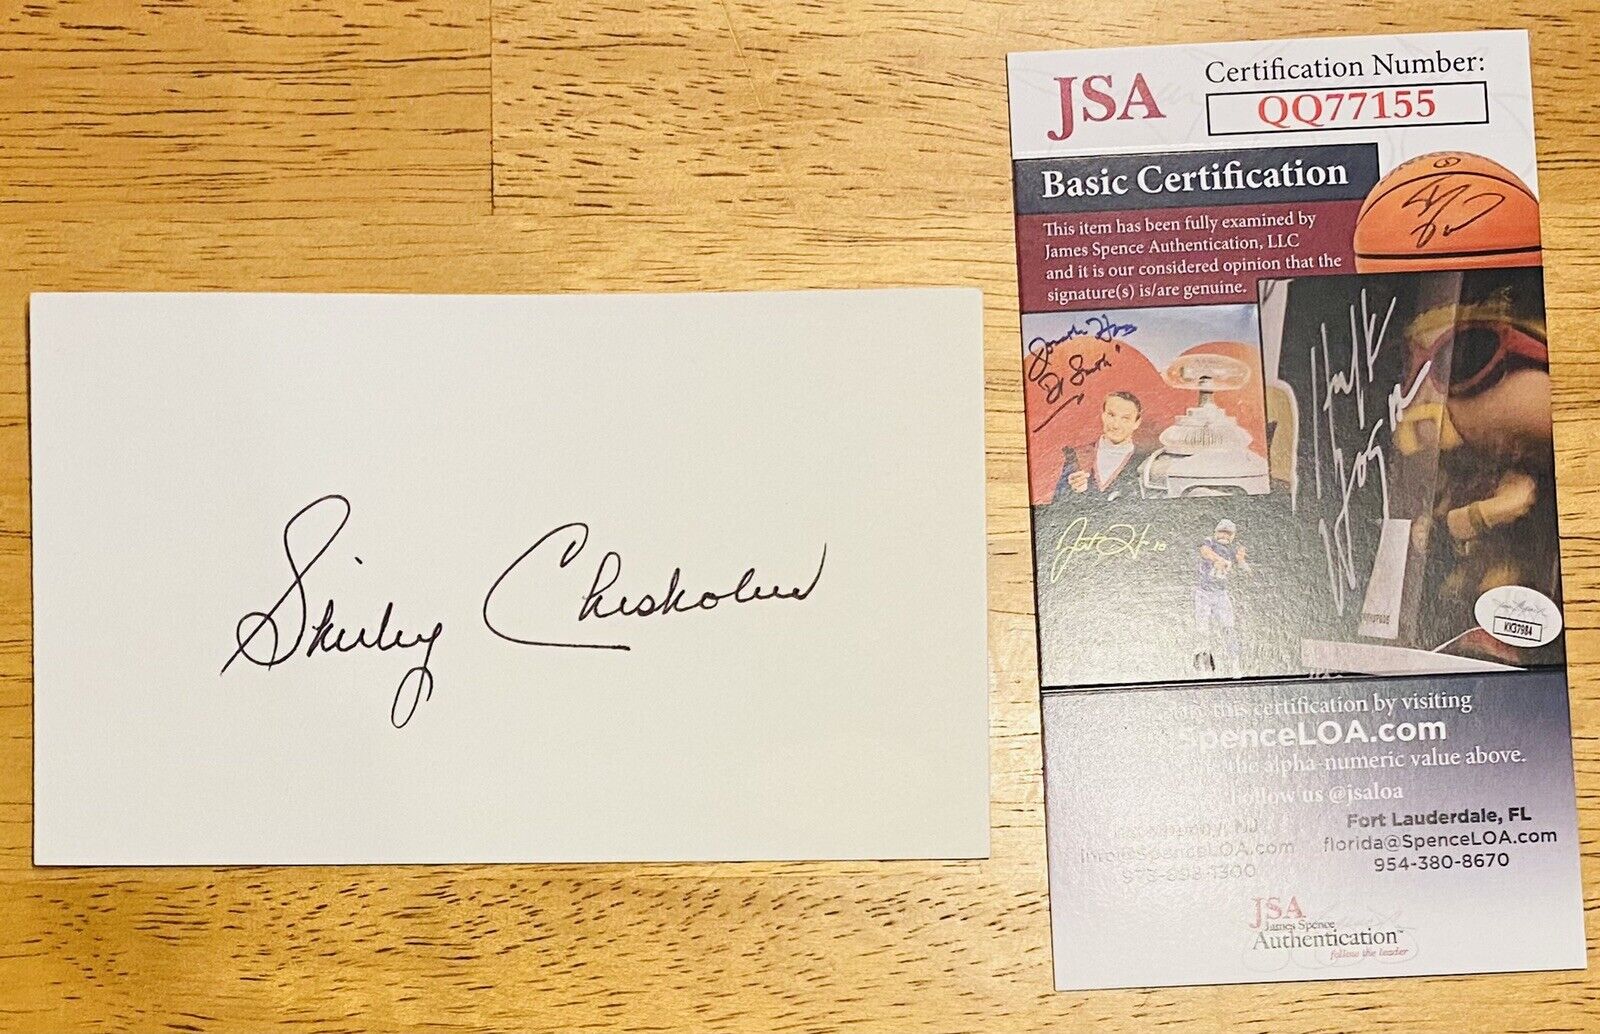 Shirley Chisholm Signed Autographed 3x5 Card JSA Certified Congresswoman